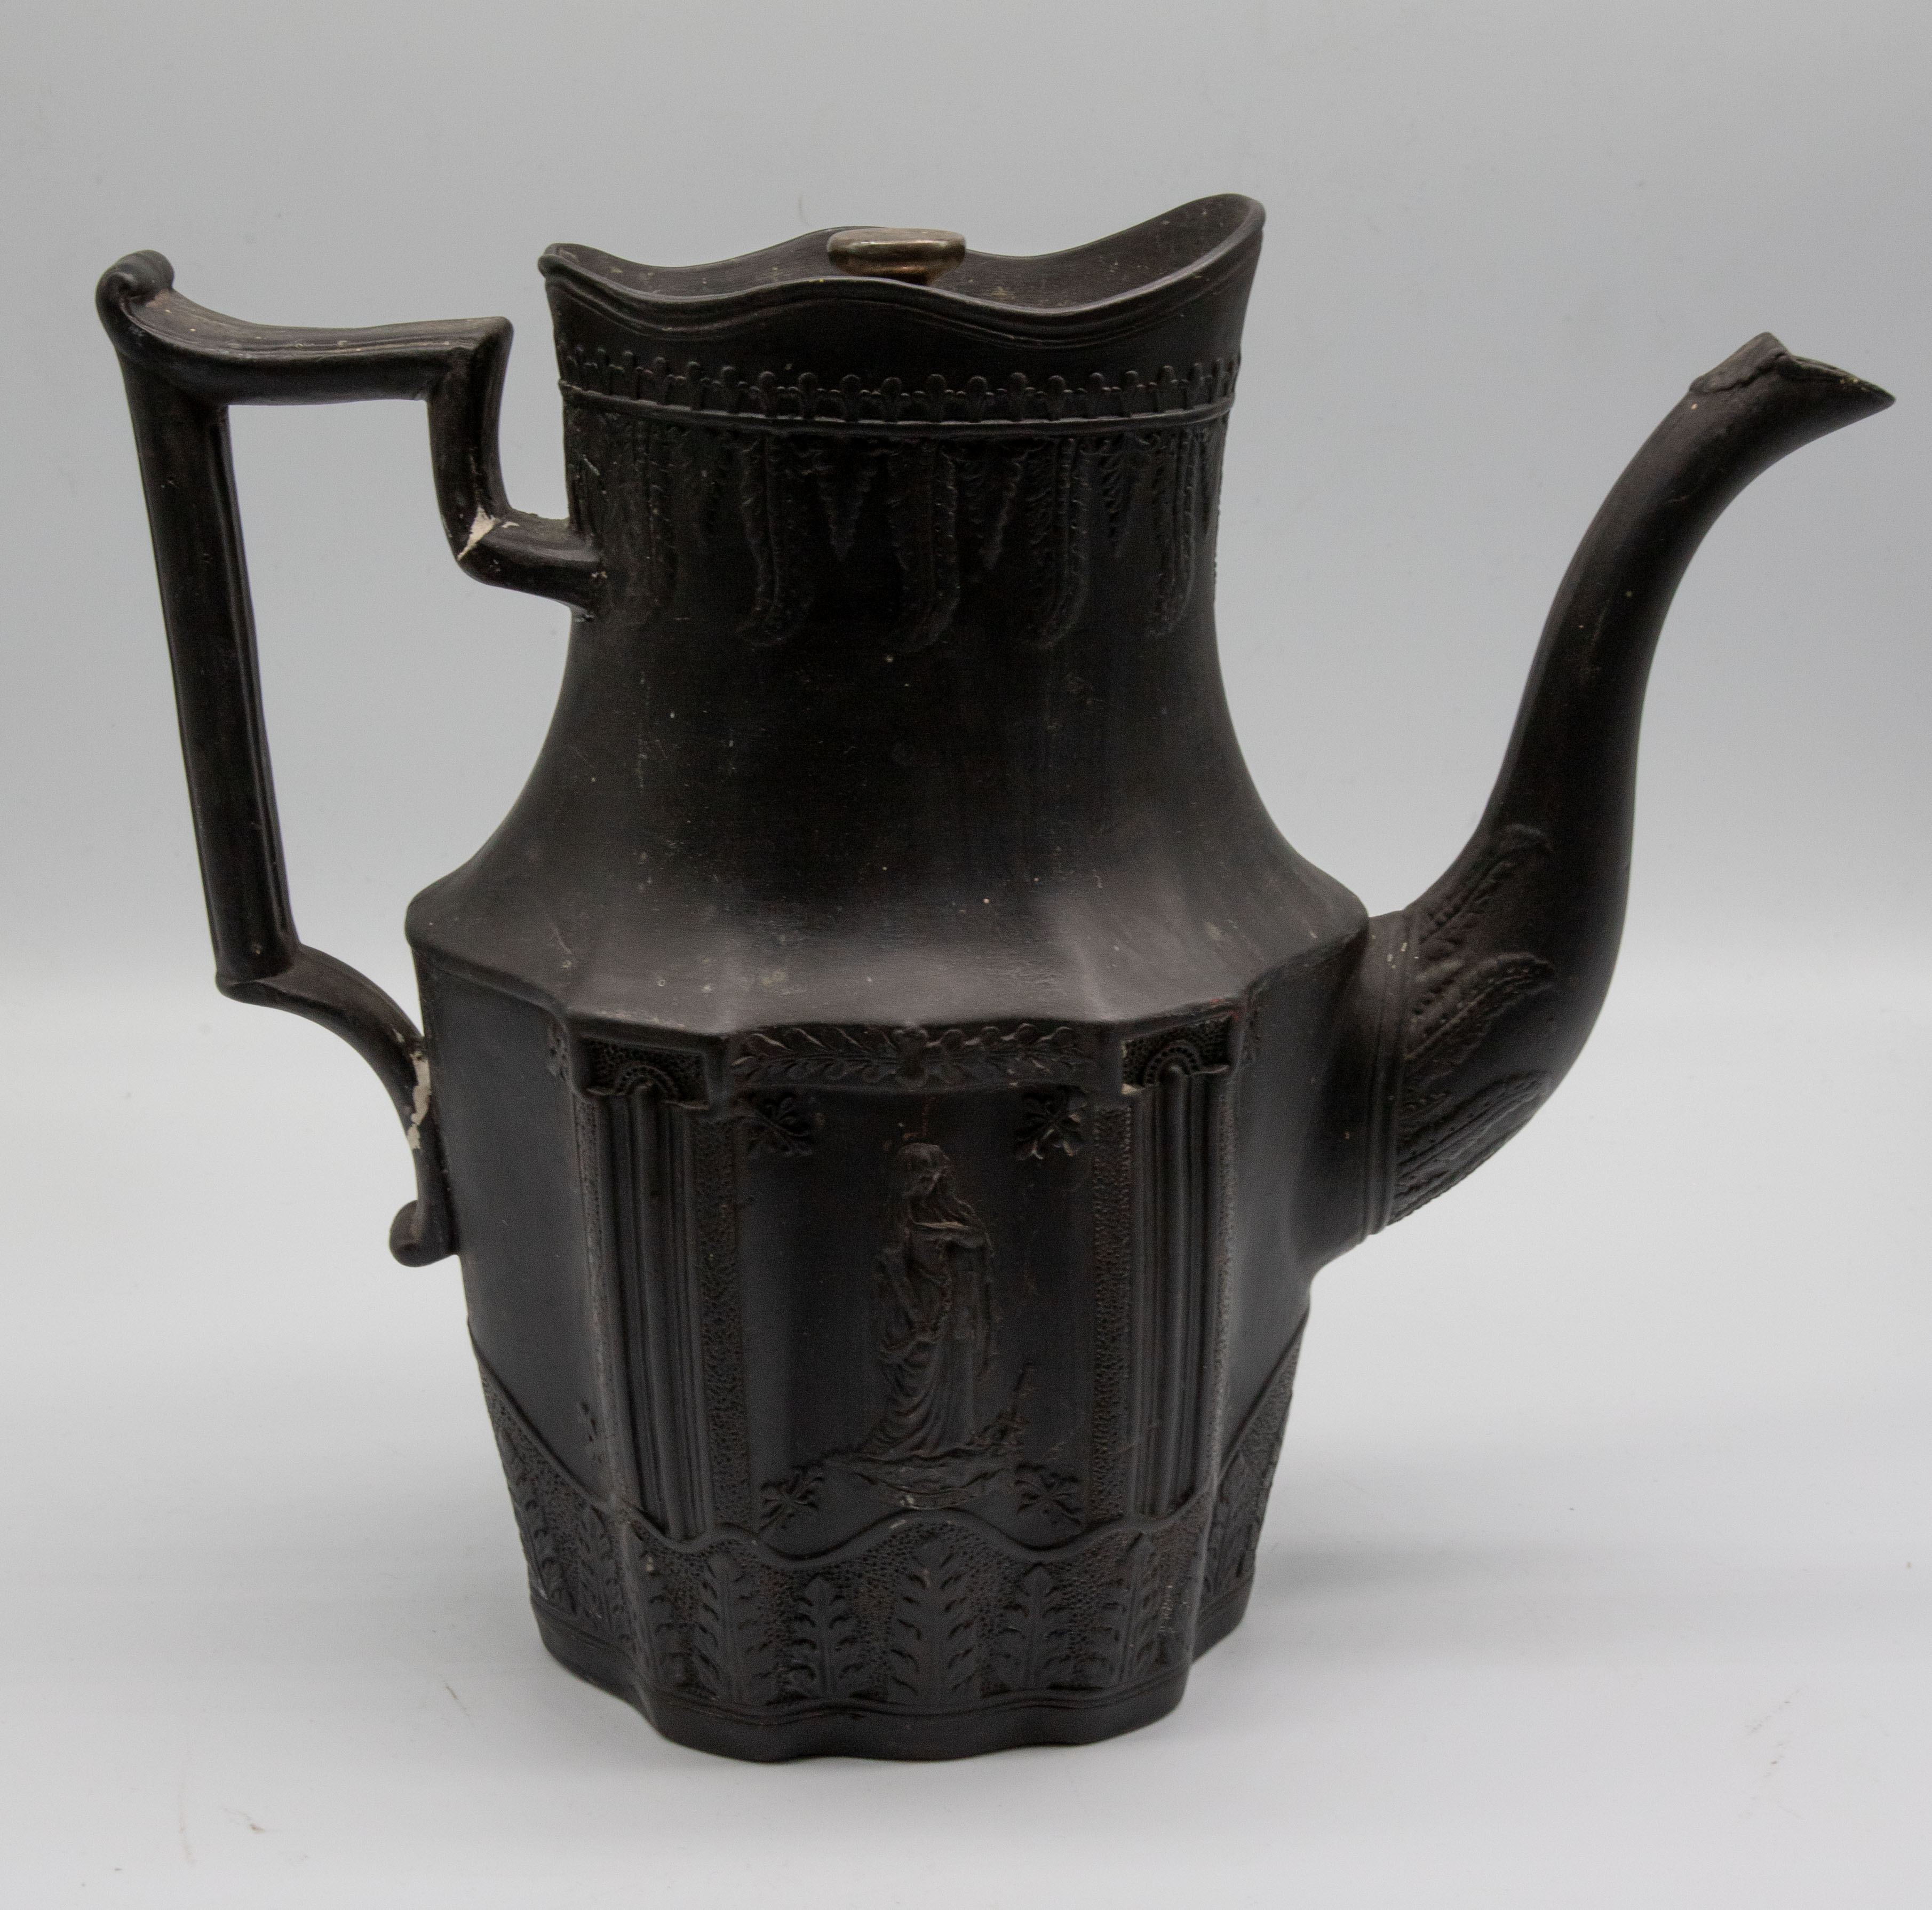 A Staffordshire black basalt coffee pot and metal cover, 19th century, unmarked, size 24cm high. - Image 3 of 7